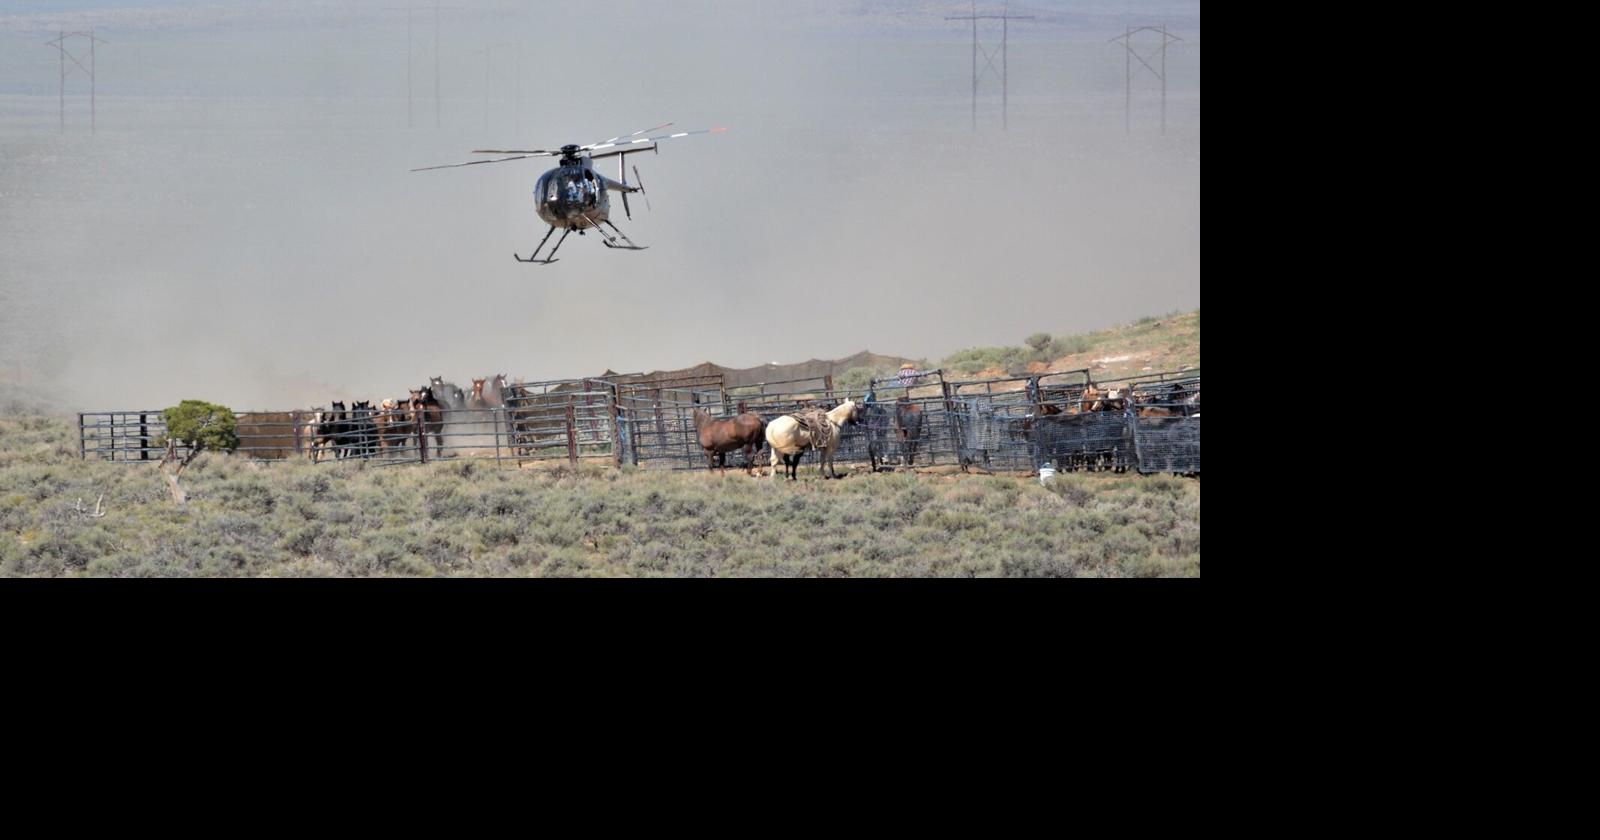 1,800 horses removed from Nevada land under extreme drought